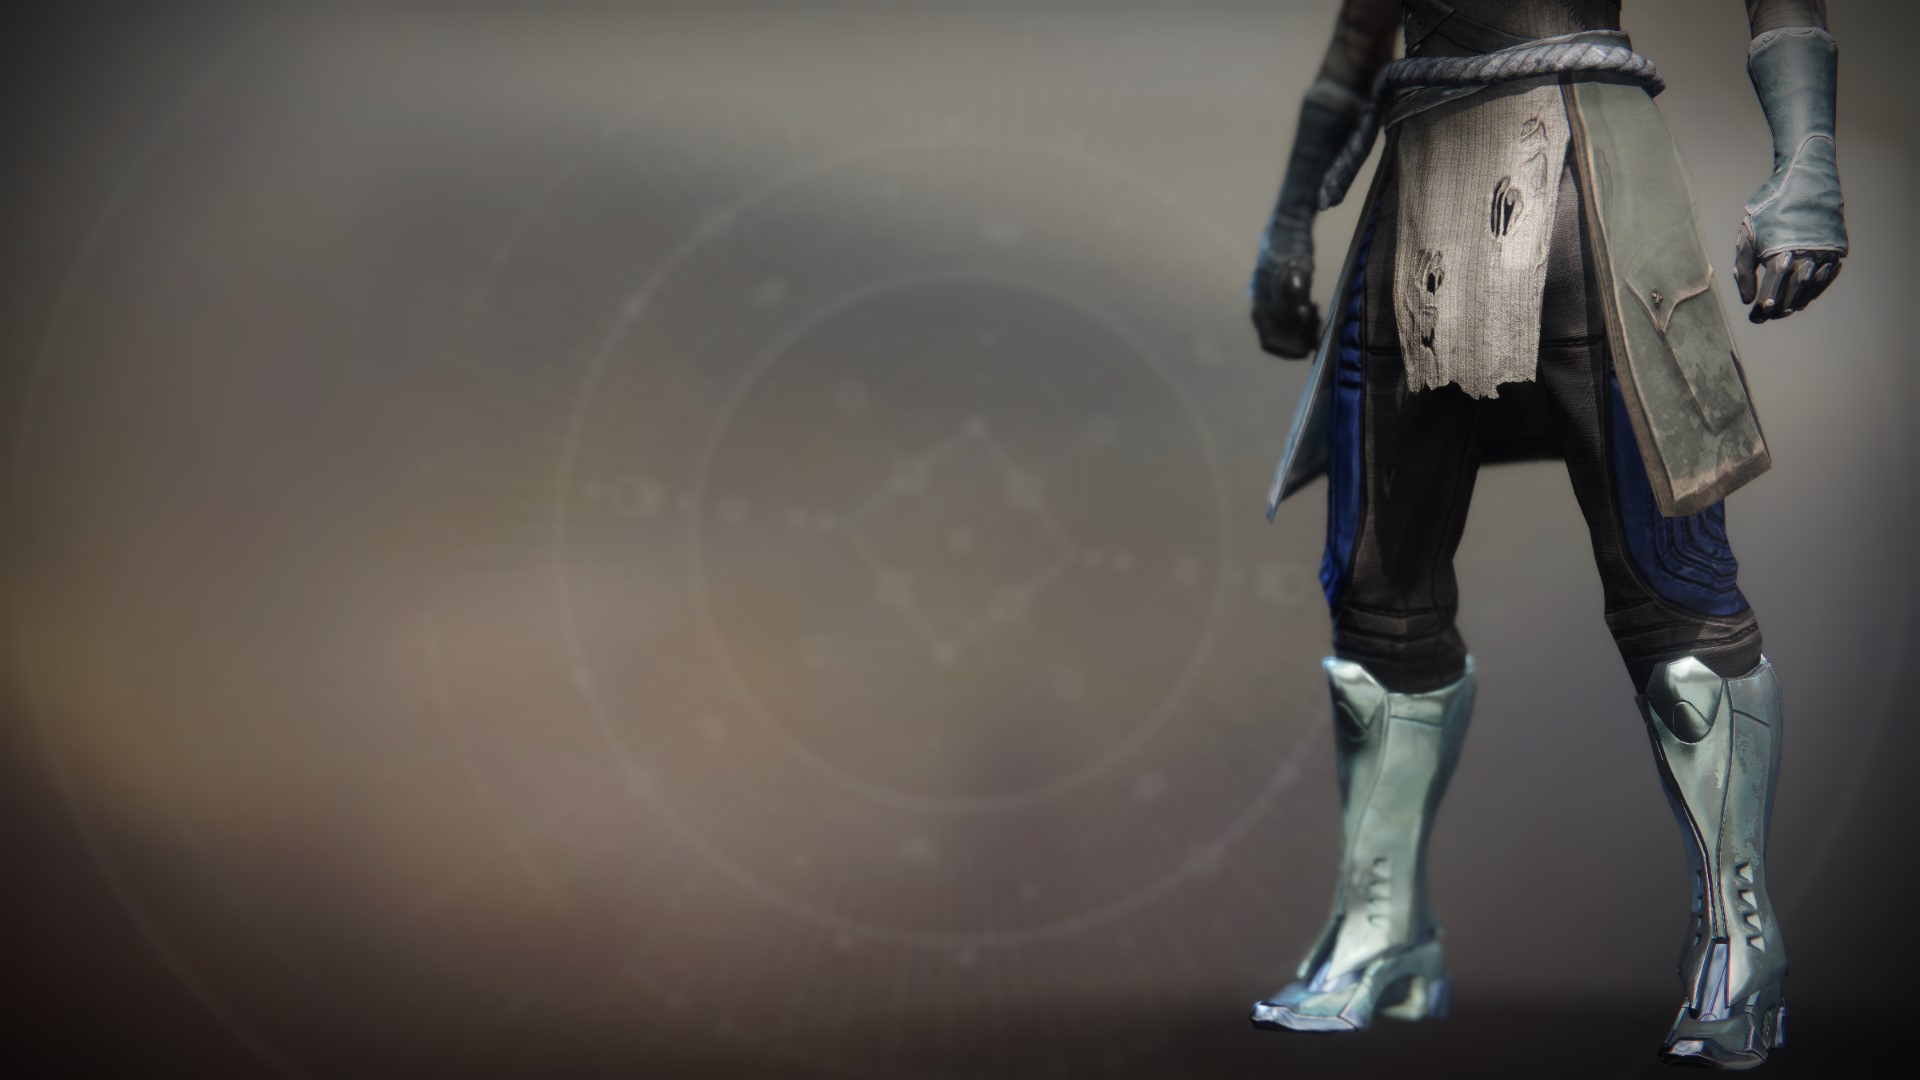 An in-game render of the Righteous Boots.